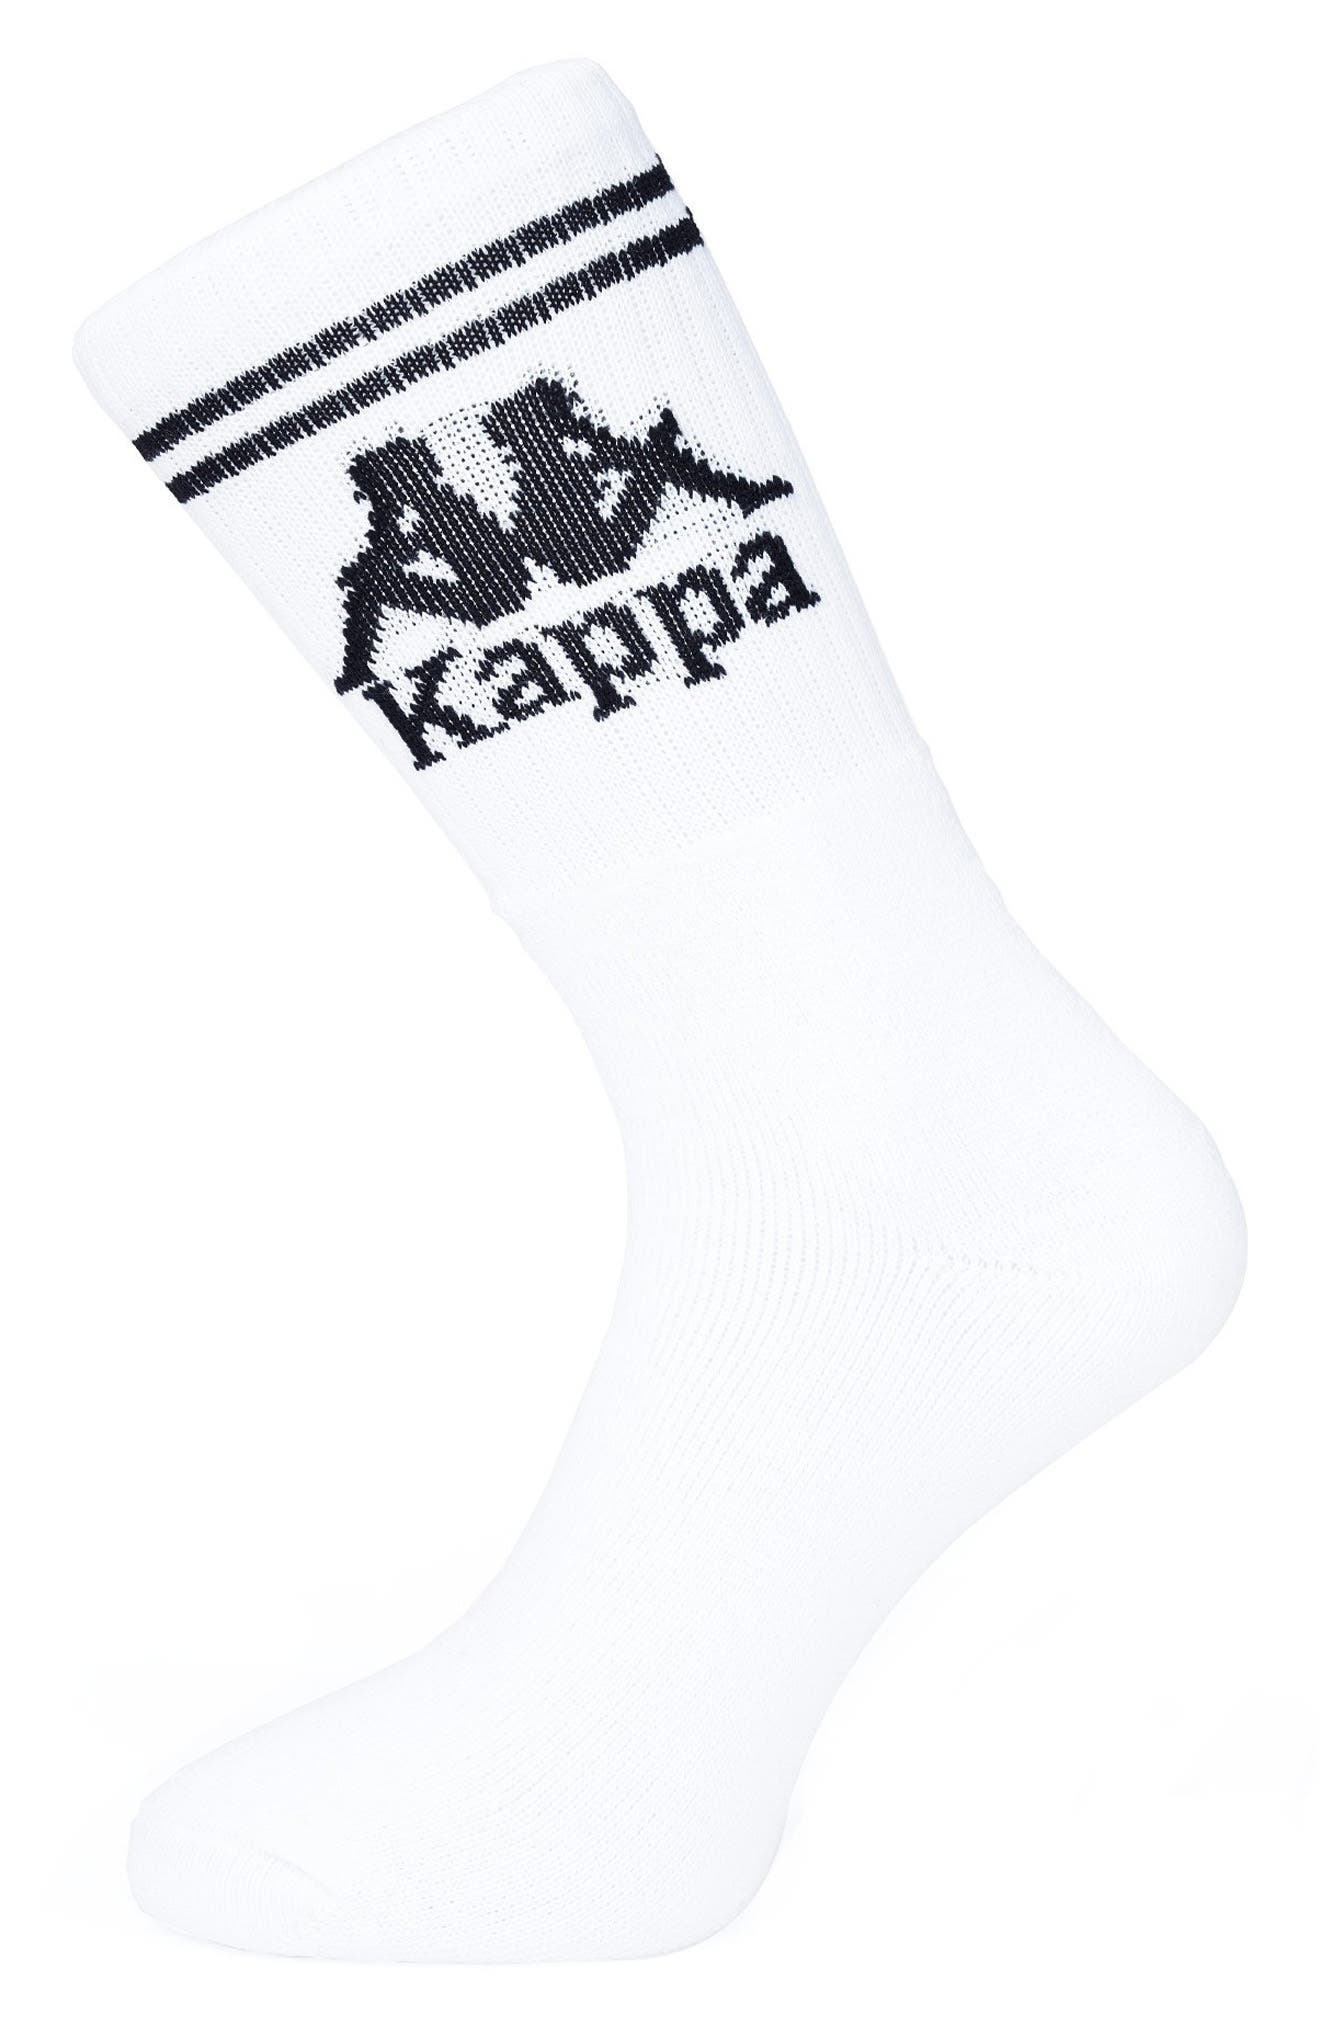 Kappa Unisex Authentic Aster Crew Socks in White-Black at Nordstrom, Size Large